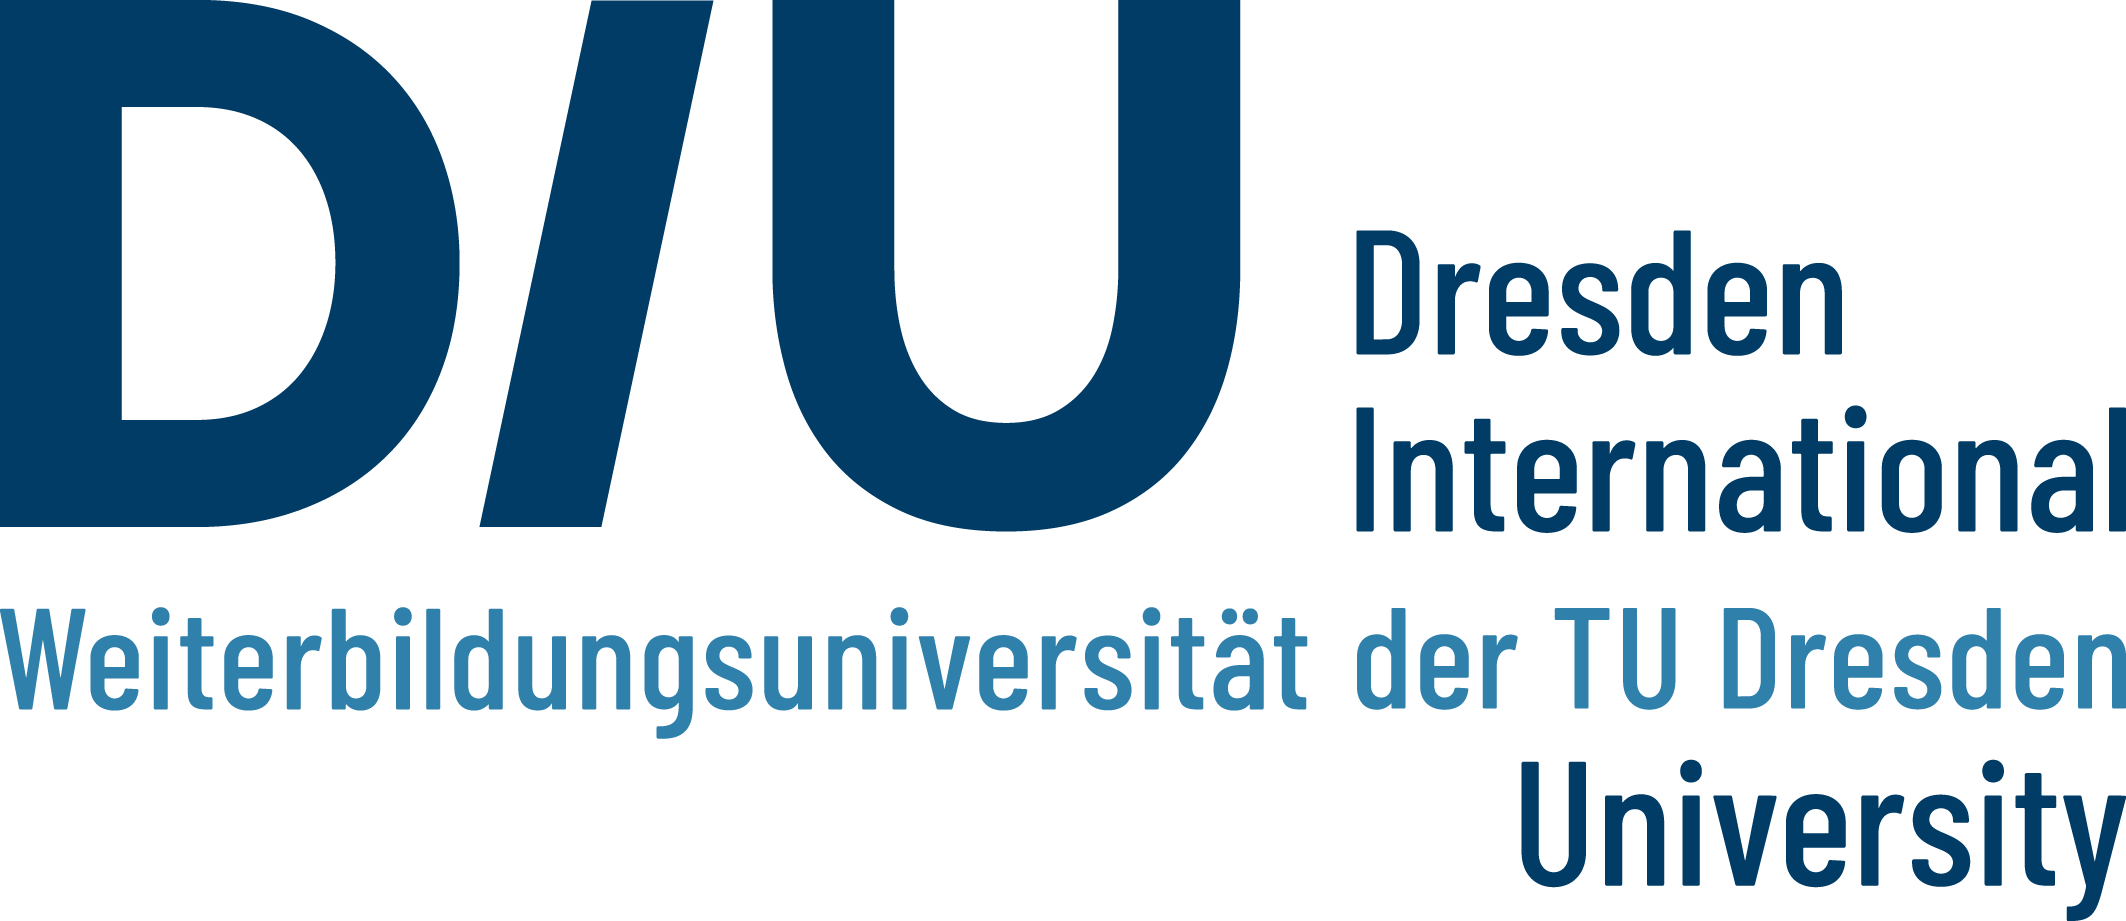 Press release: Clinerion partners with the Dresden International University to generate Real World Evidence from a Real World Data Network for the first time in an academic setting.